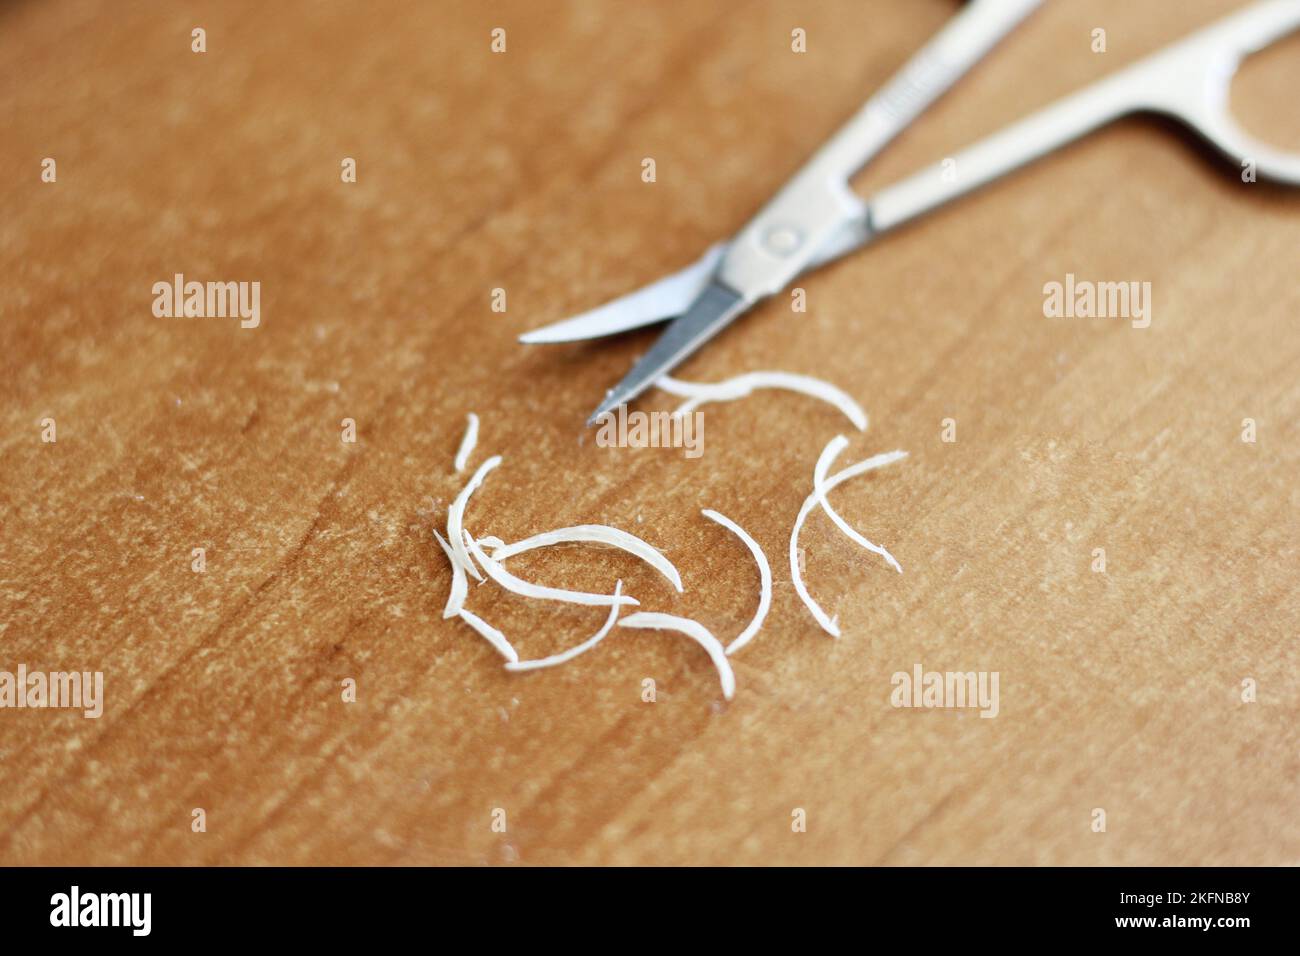 Manicure scissors with nails close up Stock Photo